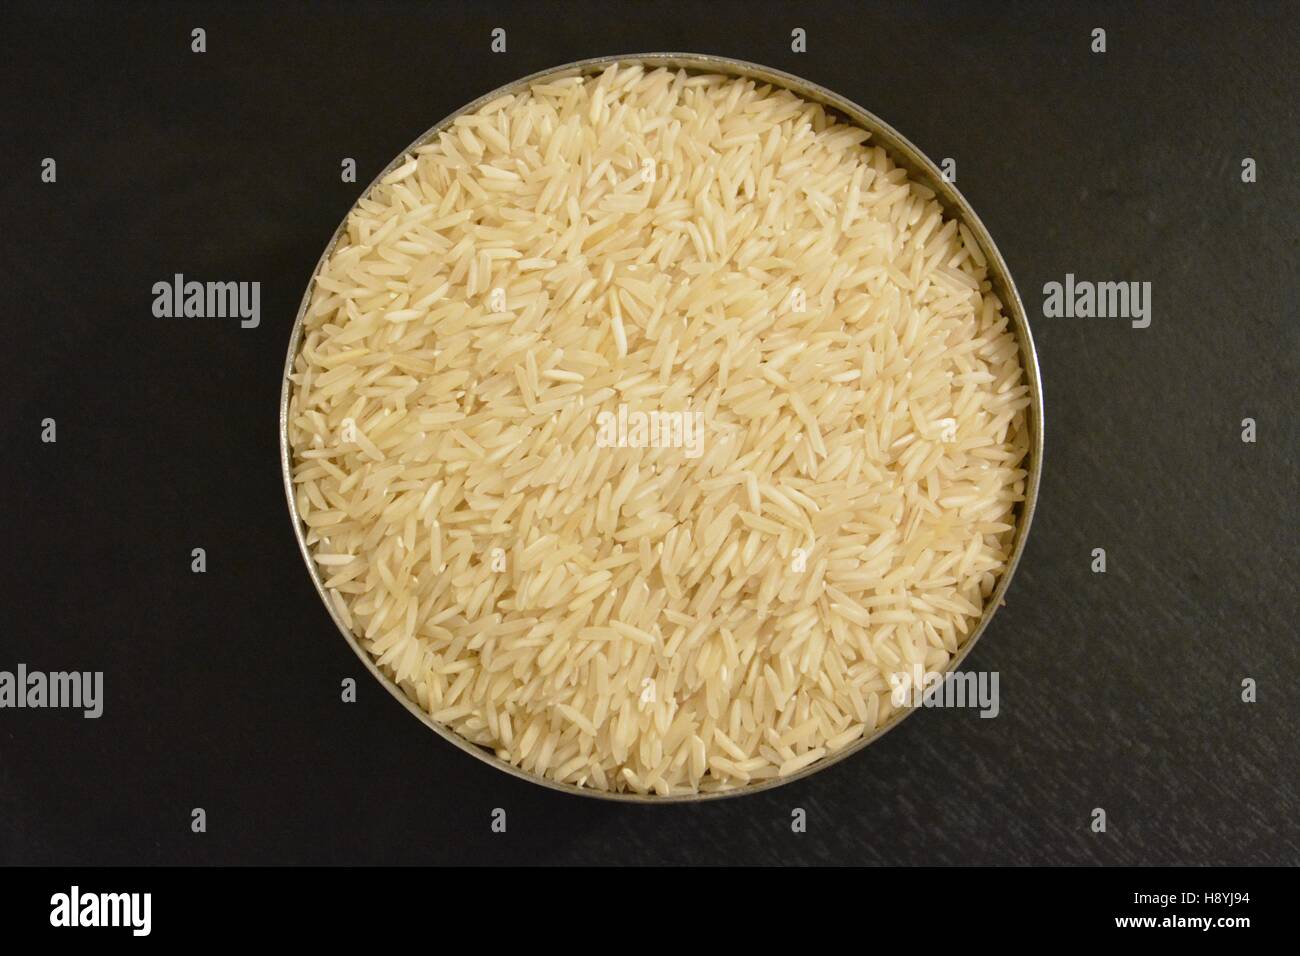 Bowl of Rice from above Stock Photo